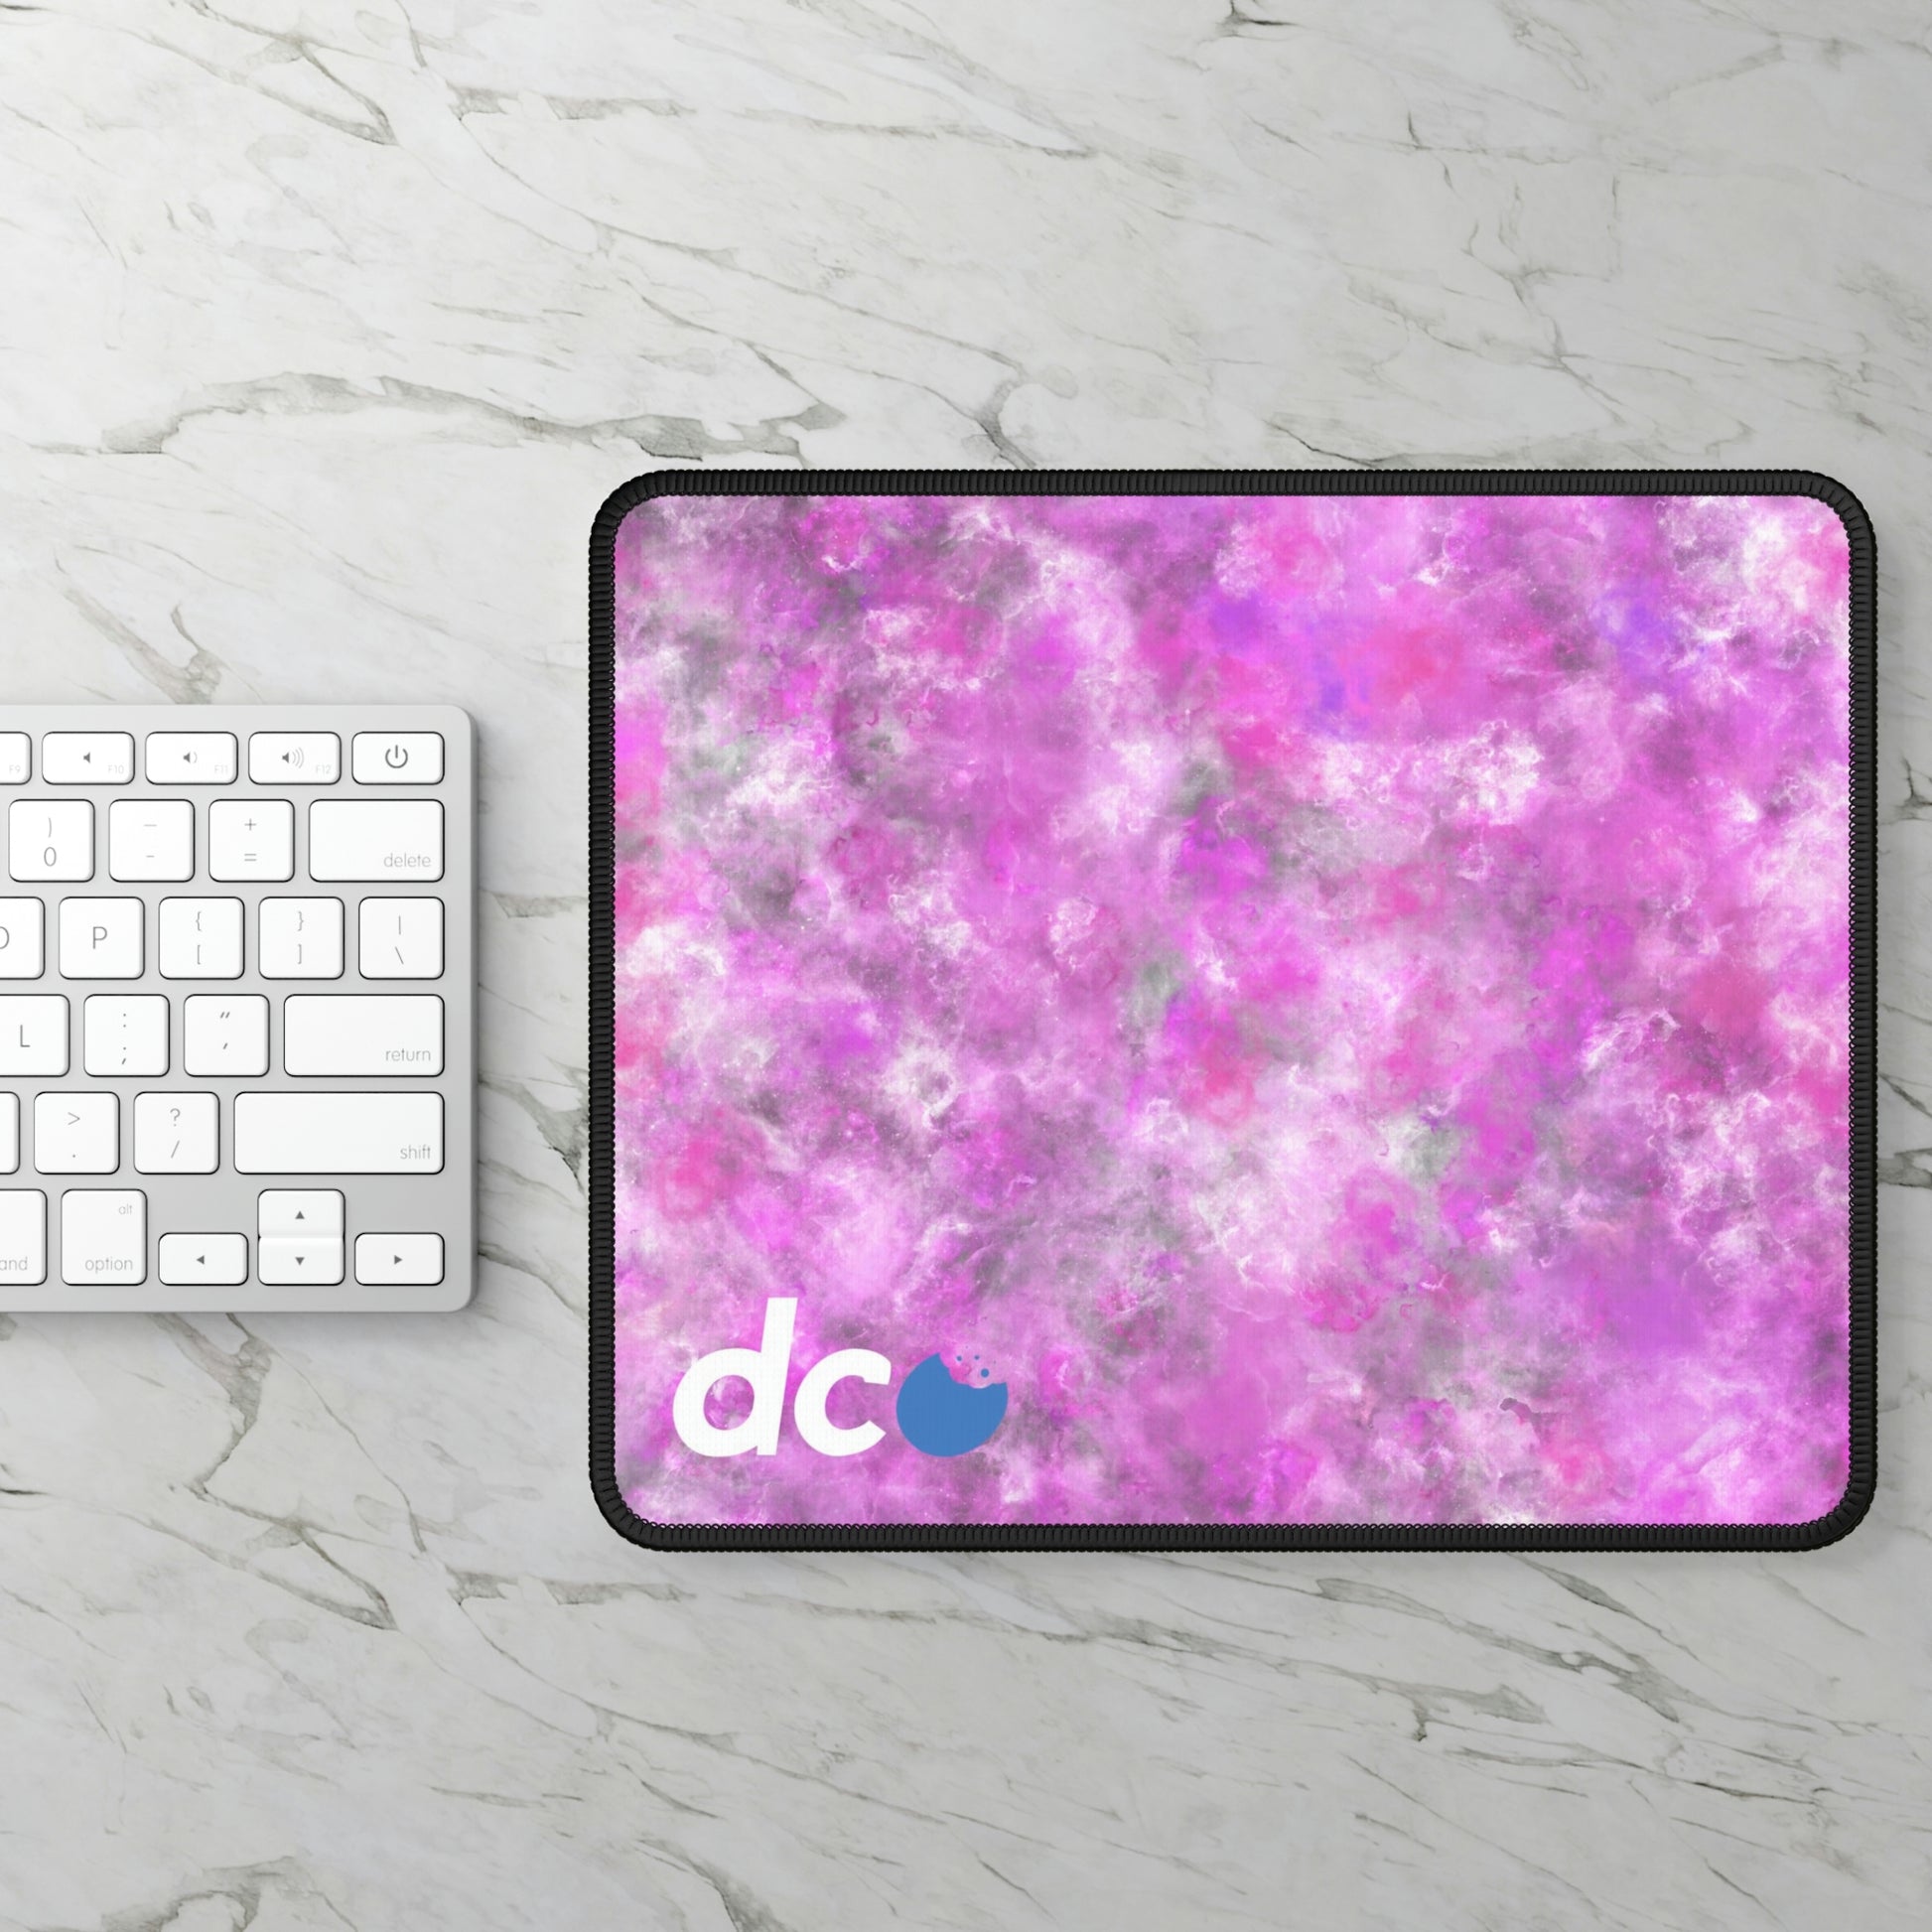 A gaming mouse pad with a fluffy mix of pink, white, and gray sitting next to a keyboard.